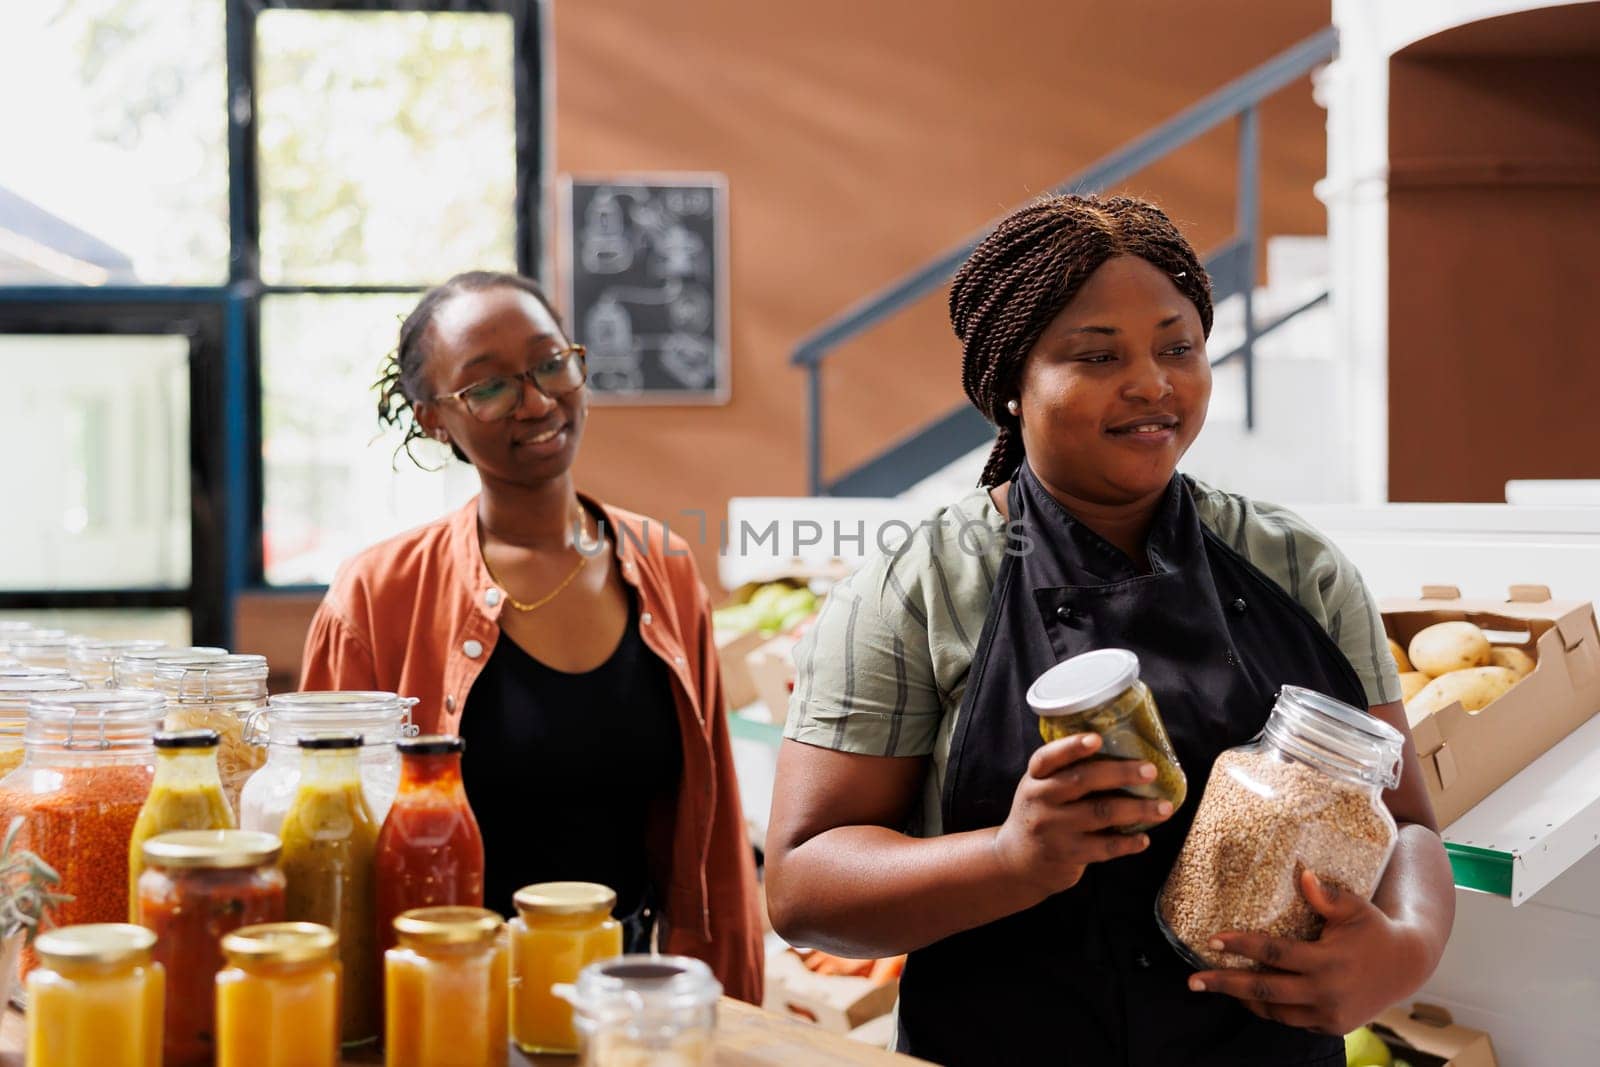 Female vendor and customer walking towards checkout counter with jars of preserved chemical free products. Black woman with an apron carrying bio organic items, assisting client at local store.